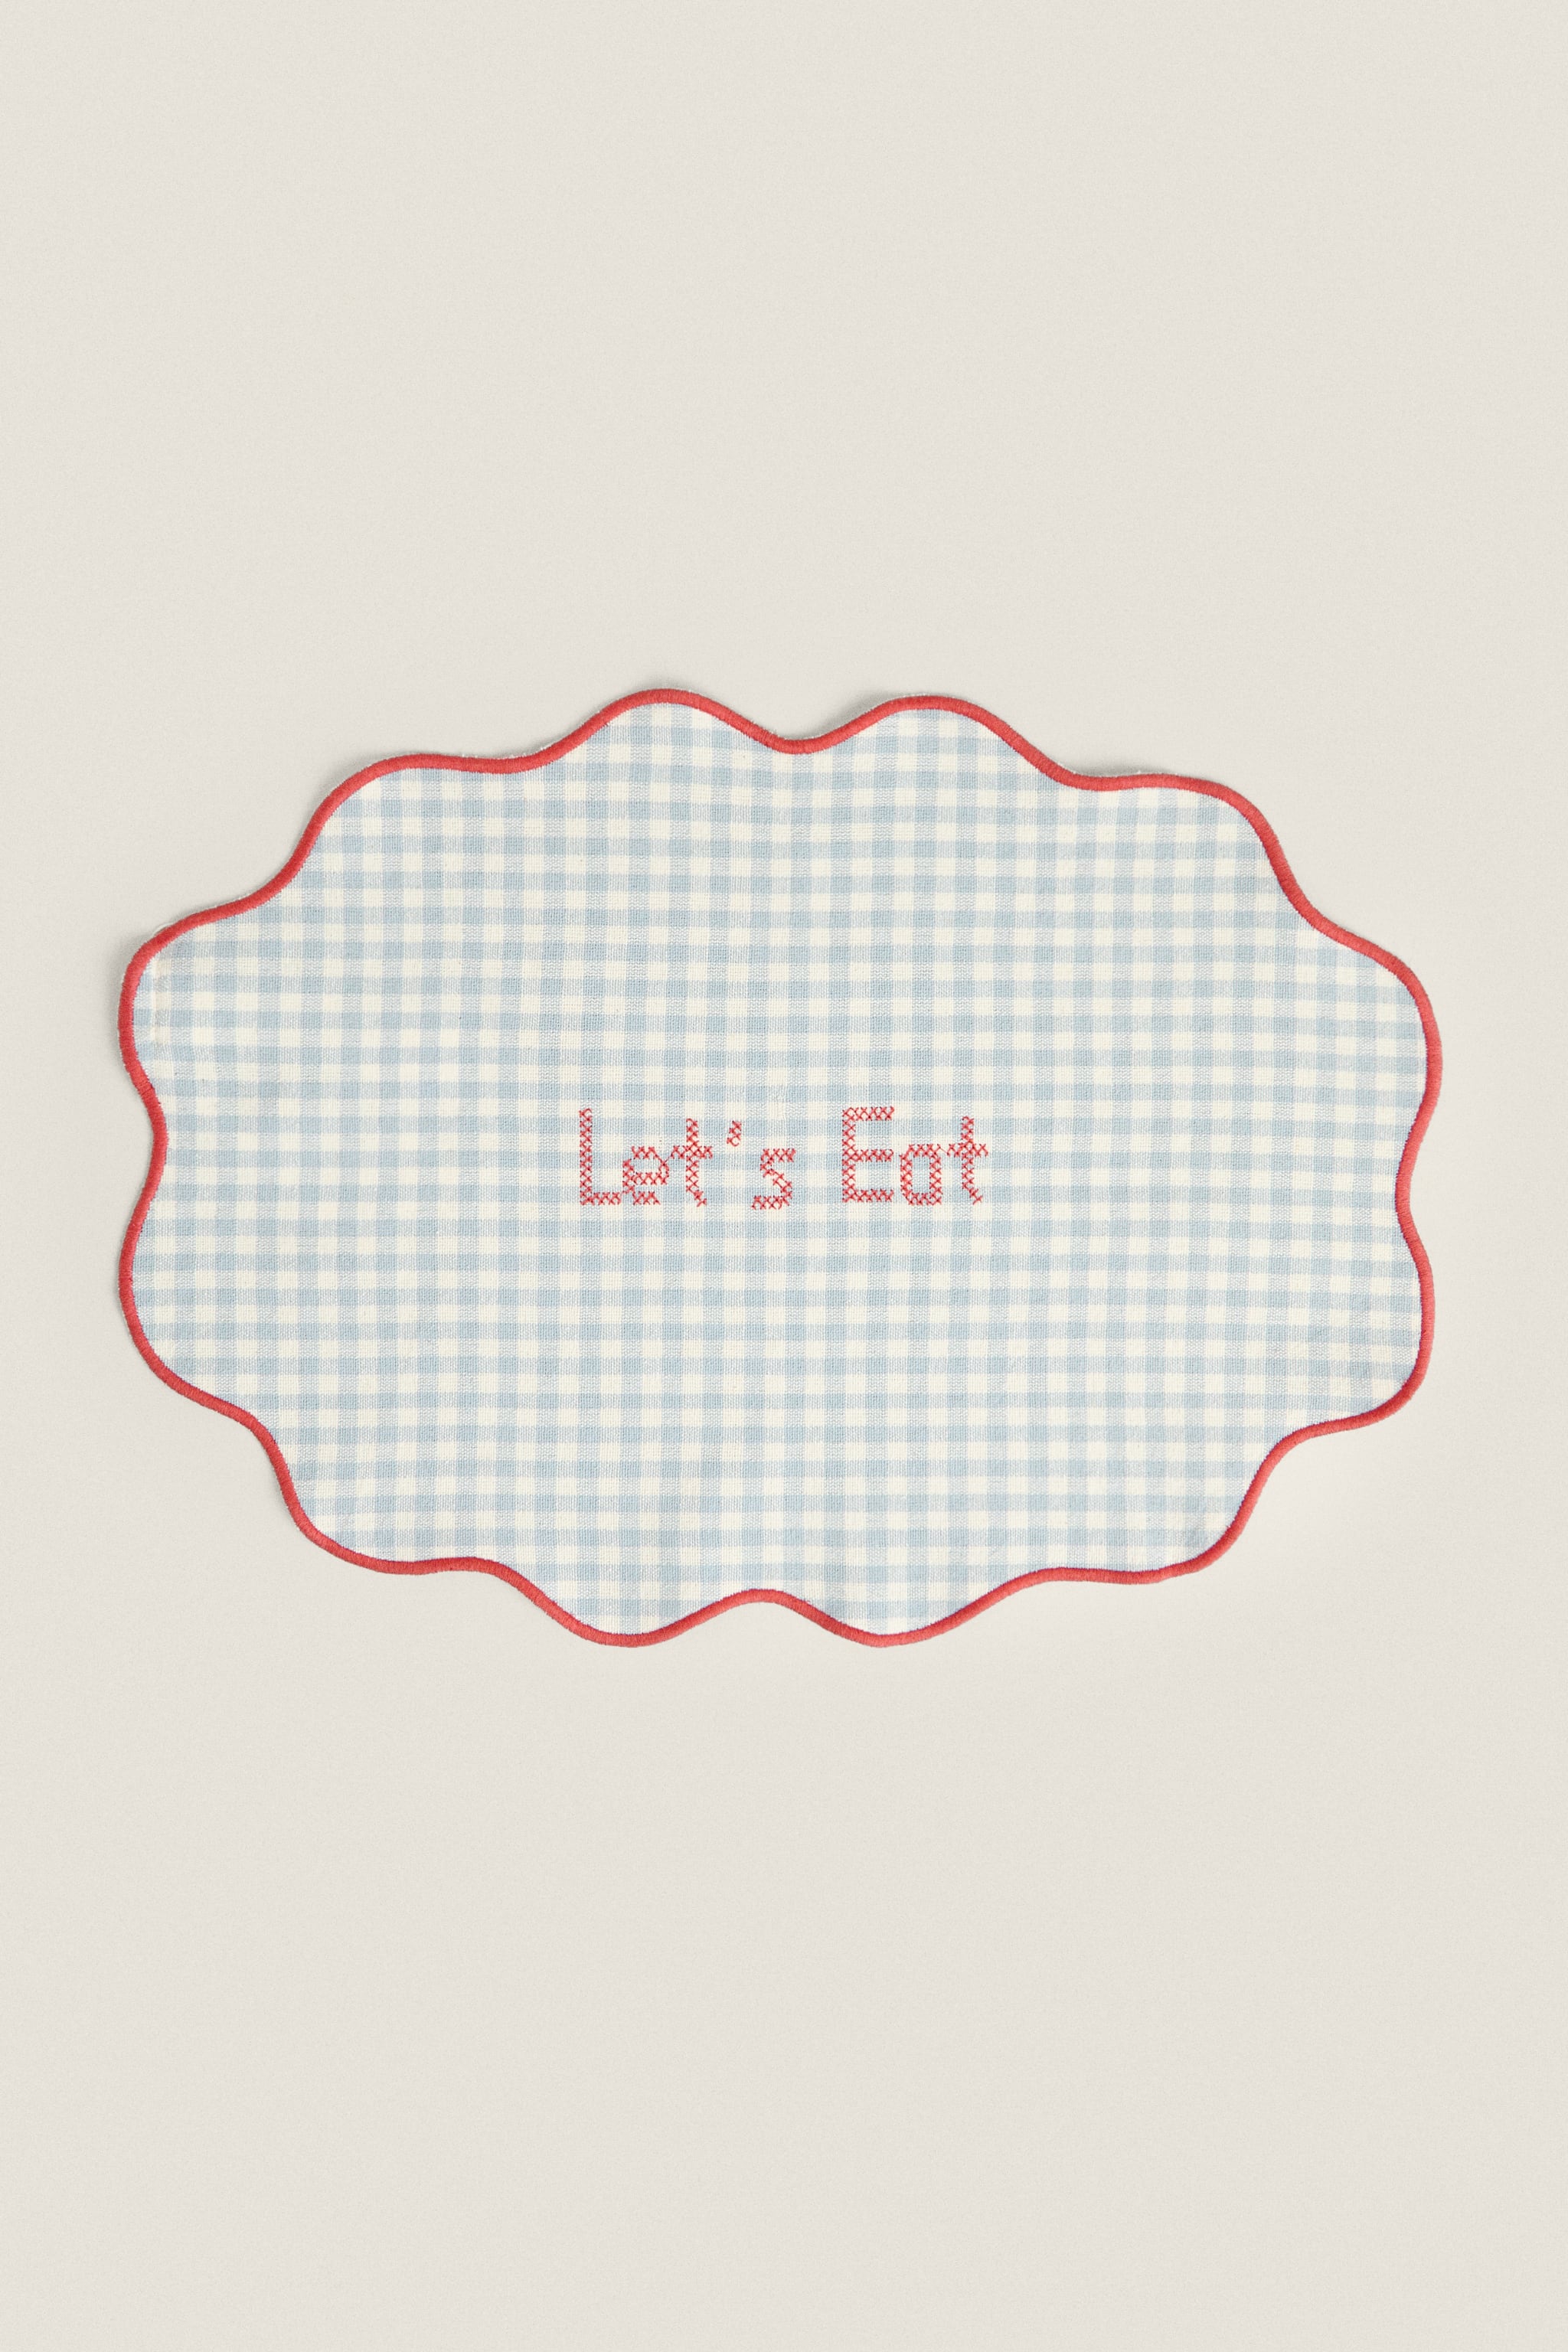 CHILDREN’S GINGHAM PLACEMAT WITH SLOGAN